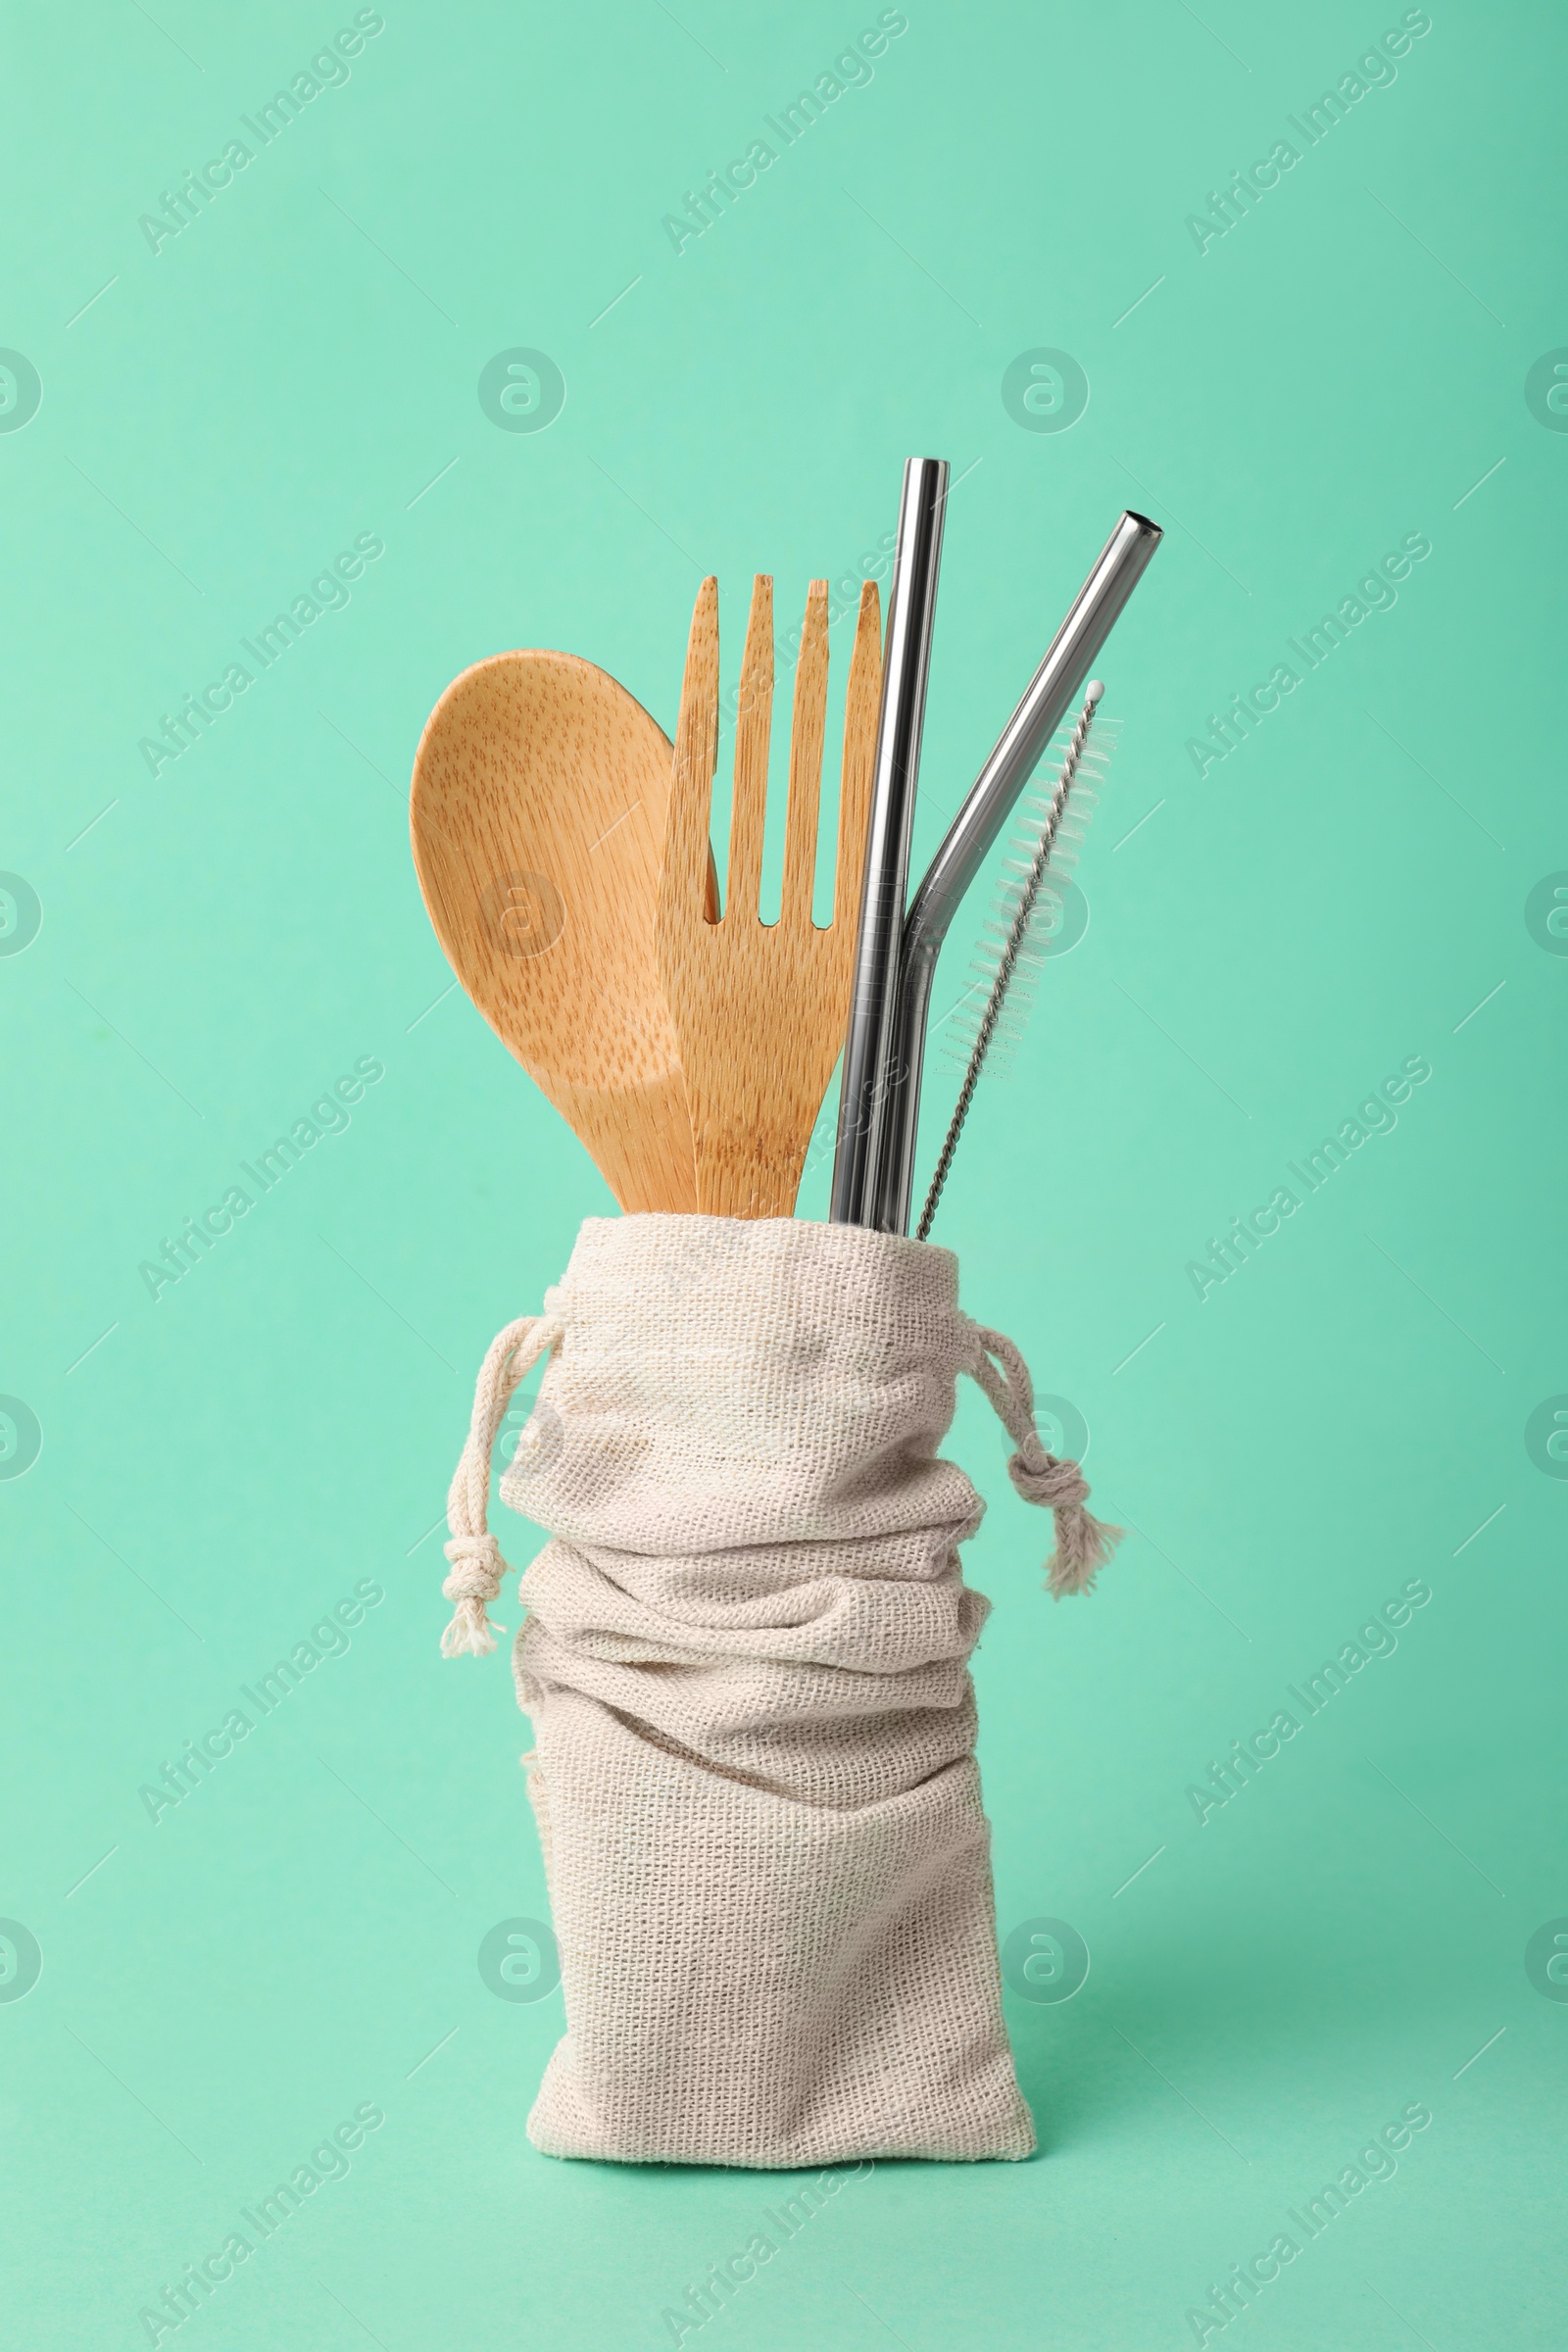 Photo of Bag with bamboo cutlery, metal straws and brush on turquoise background. Conscious consumption